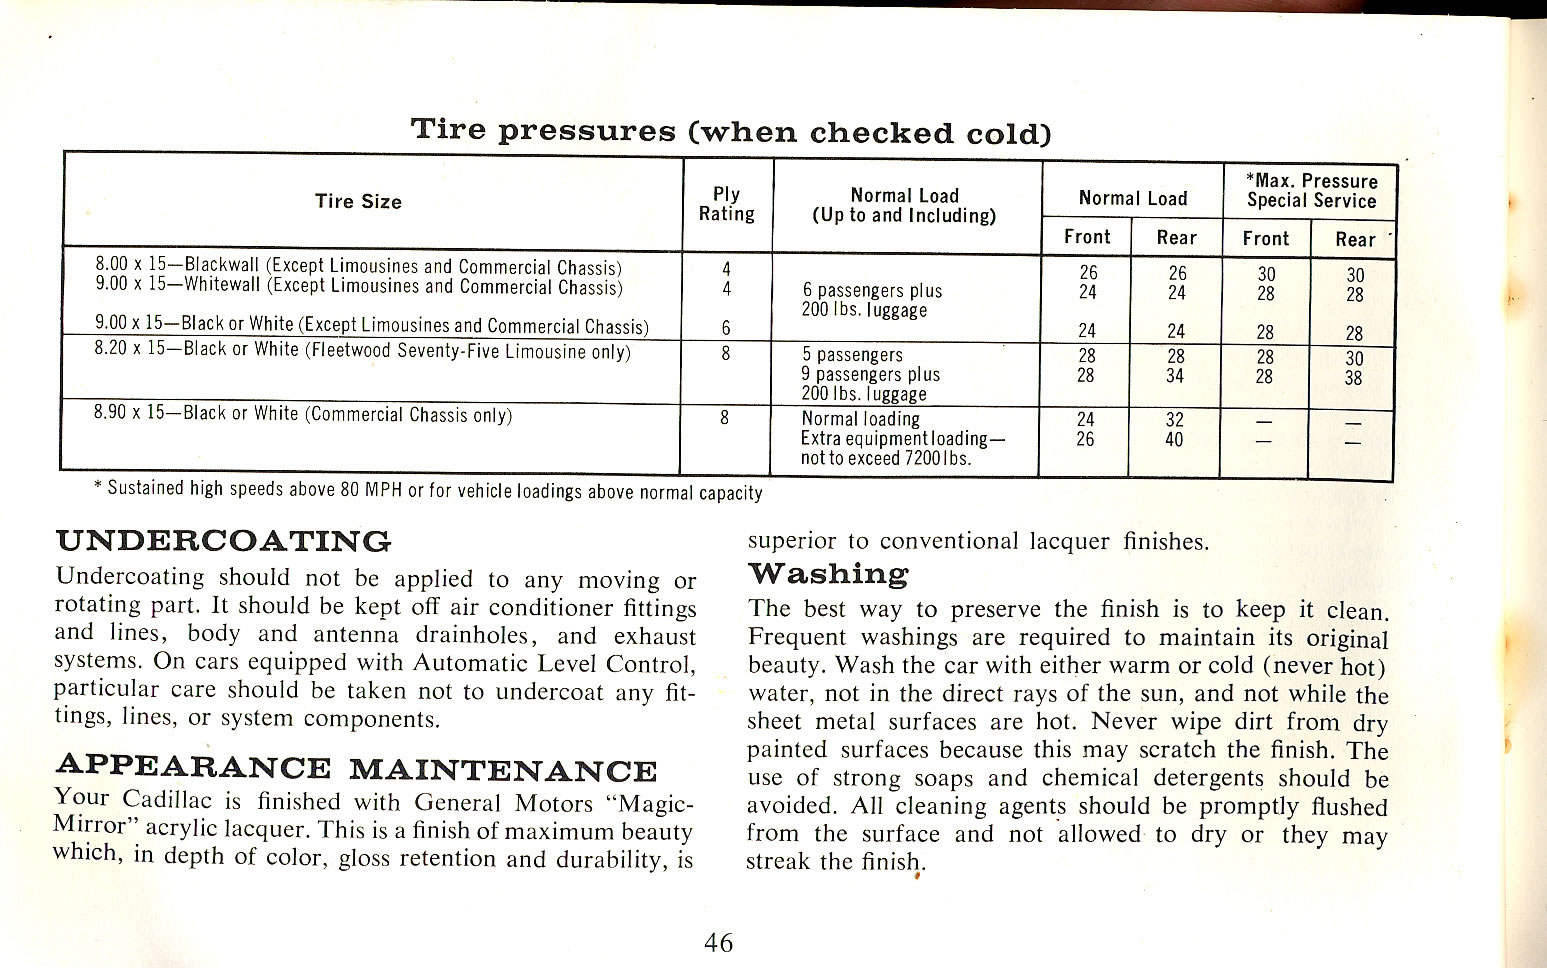 1965 Cadillac Owners Manual Page 35